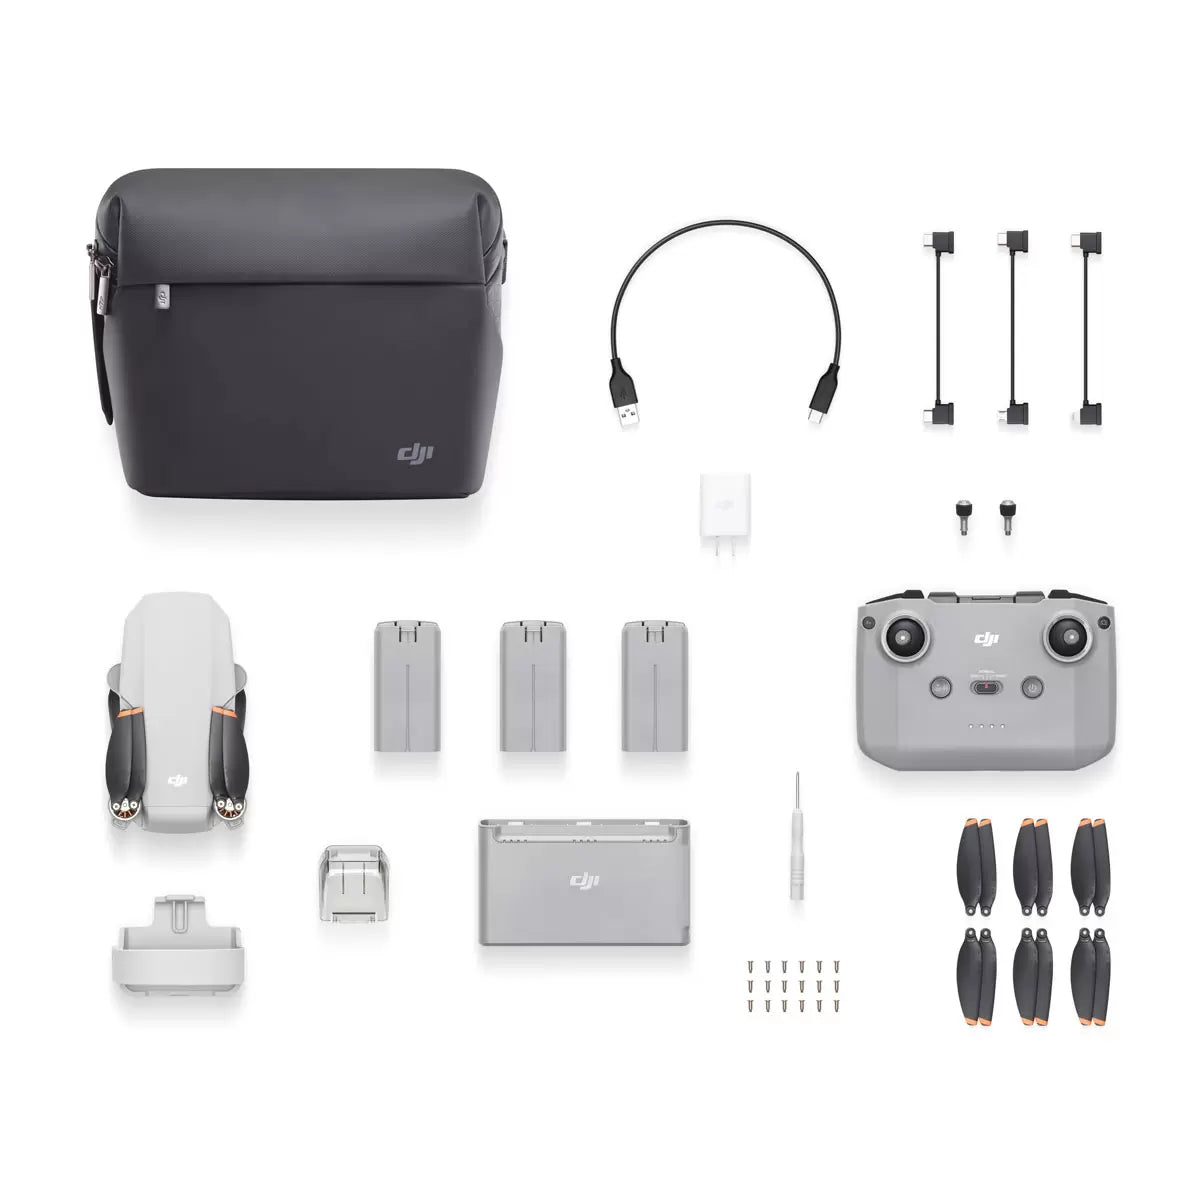 DJI Mini 2 Fly More Bundle with 64GB Samsung Evo microSD cards for Action Sports Cameras